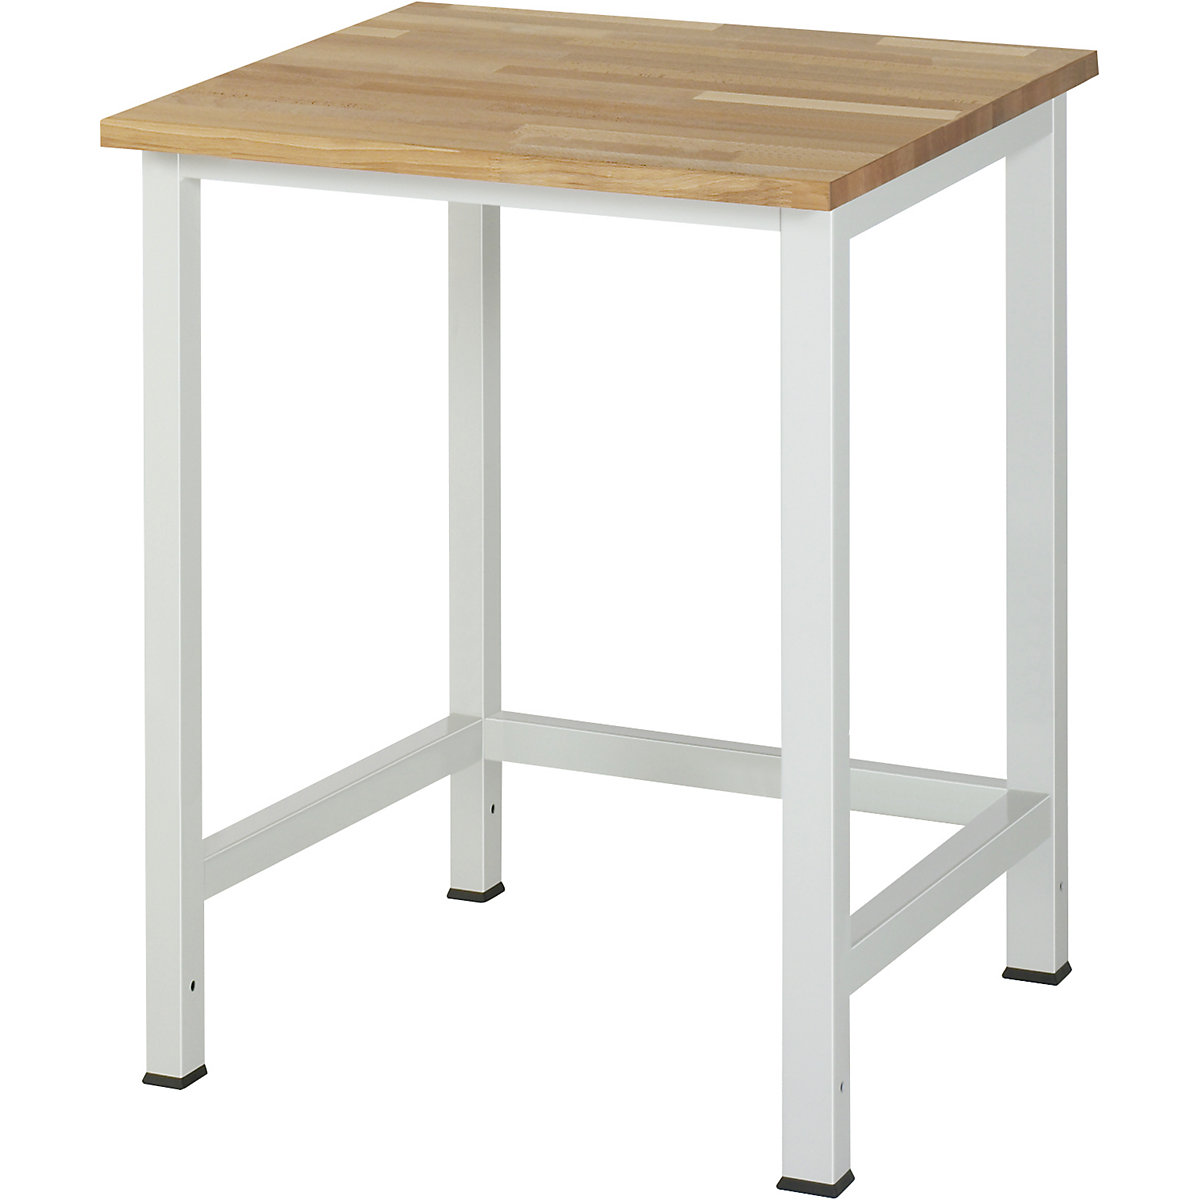 Work table for workstation system - RAU